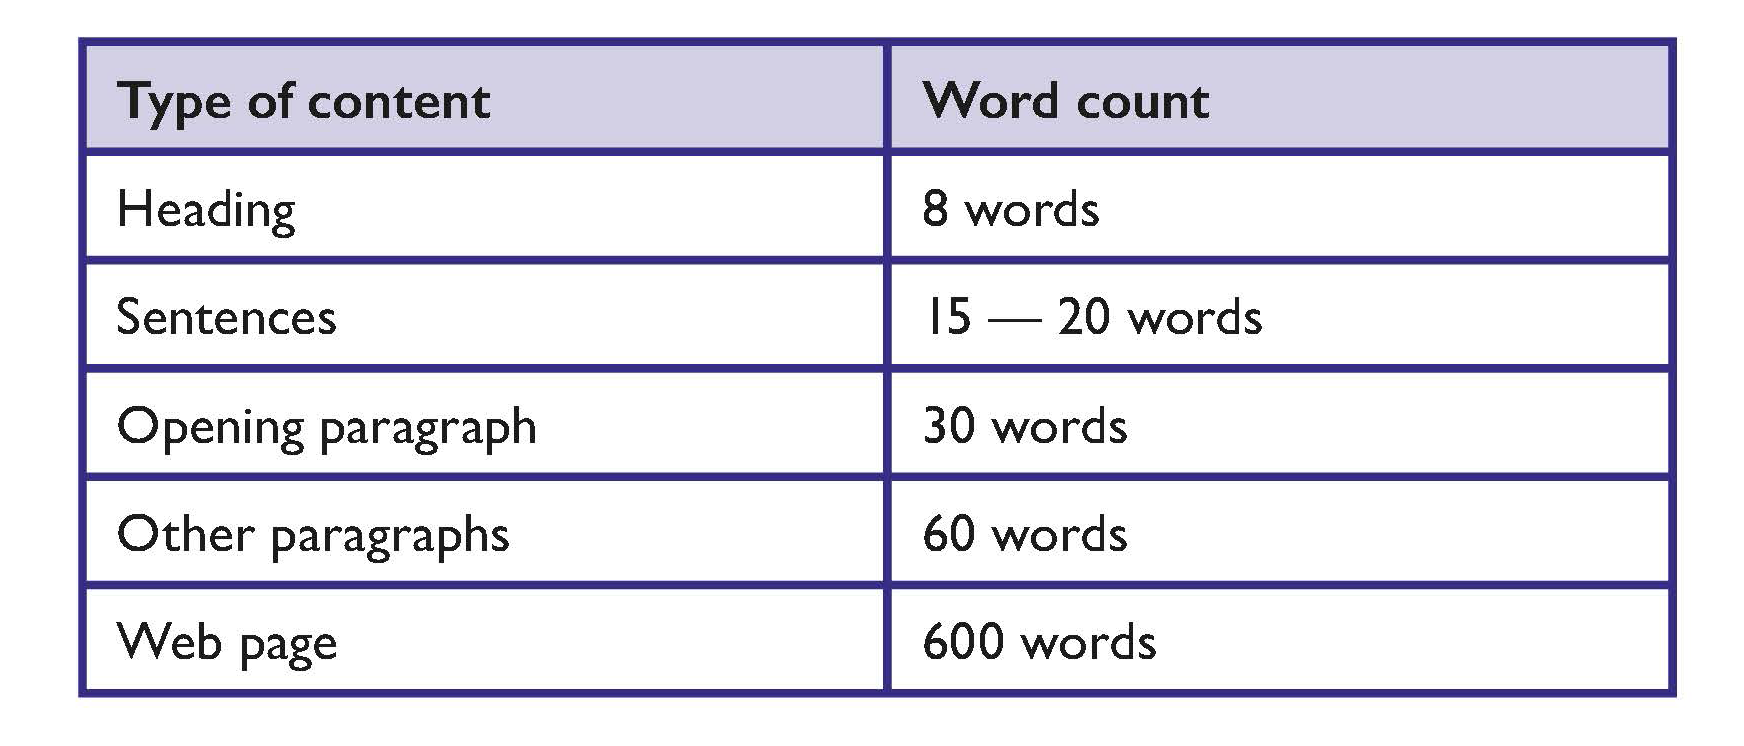 Suggested word count for headings, sentences, opening paragraphs, other paragraphs and web pages